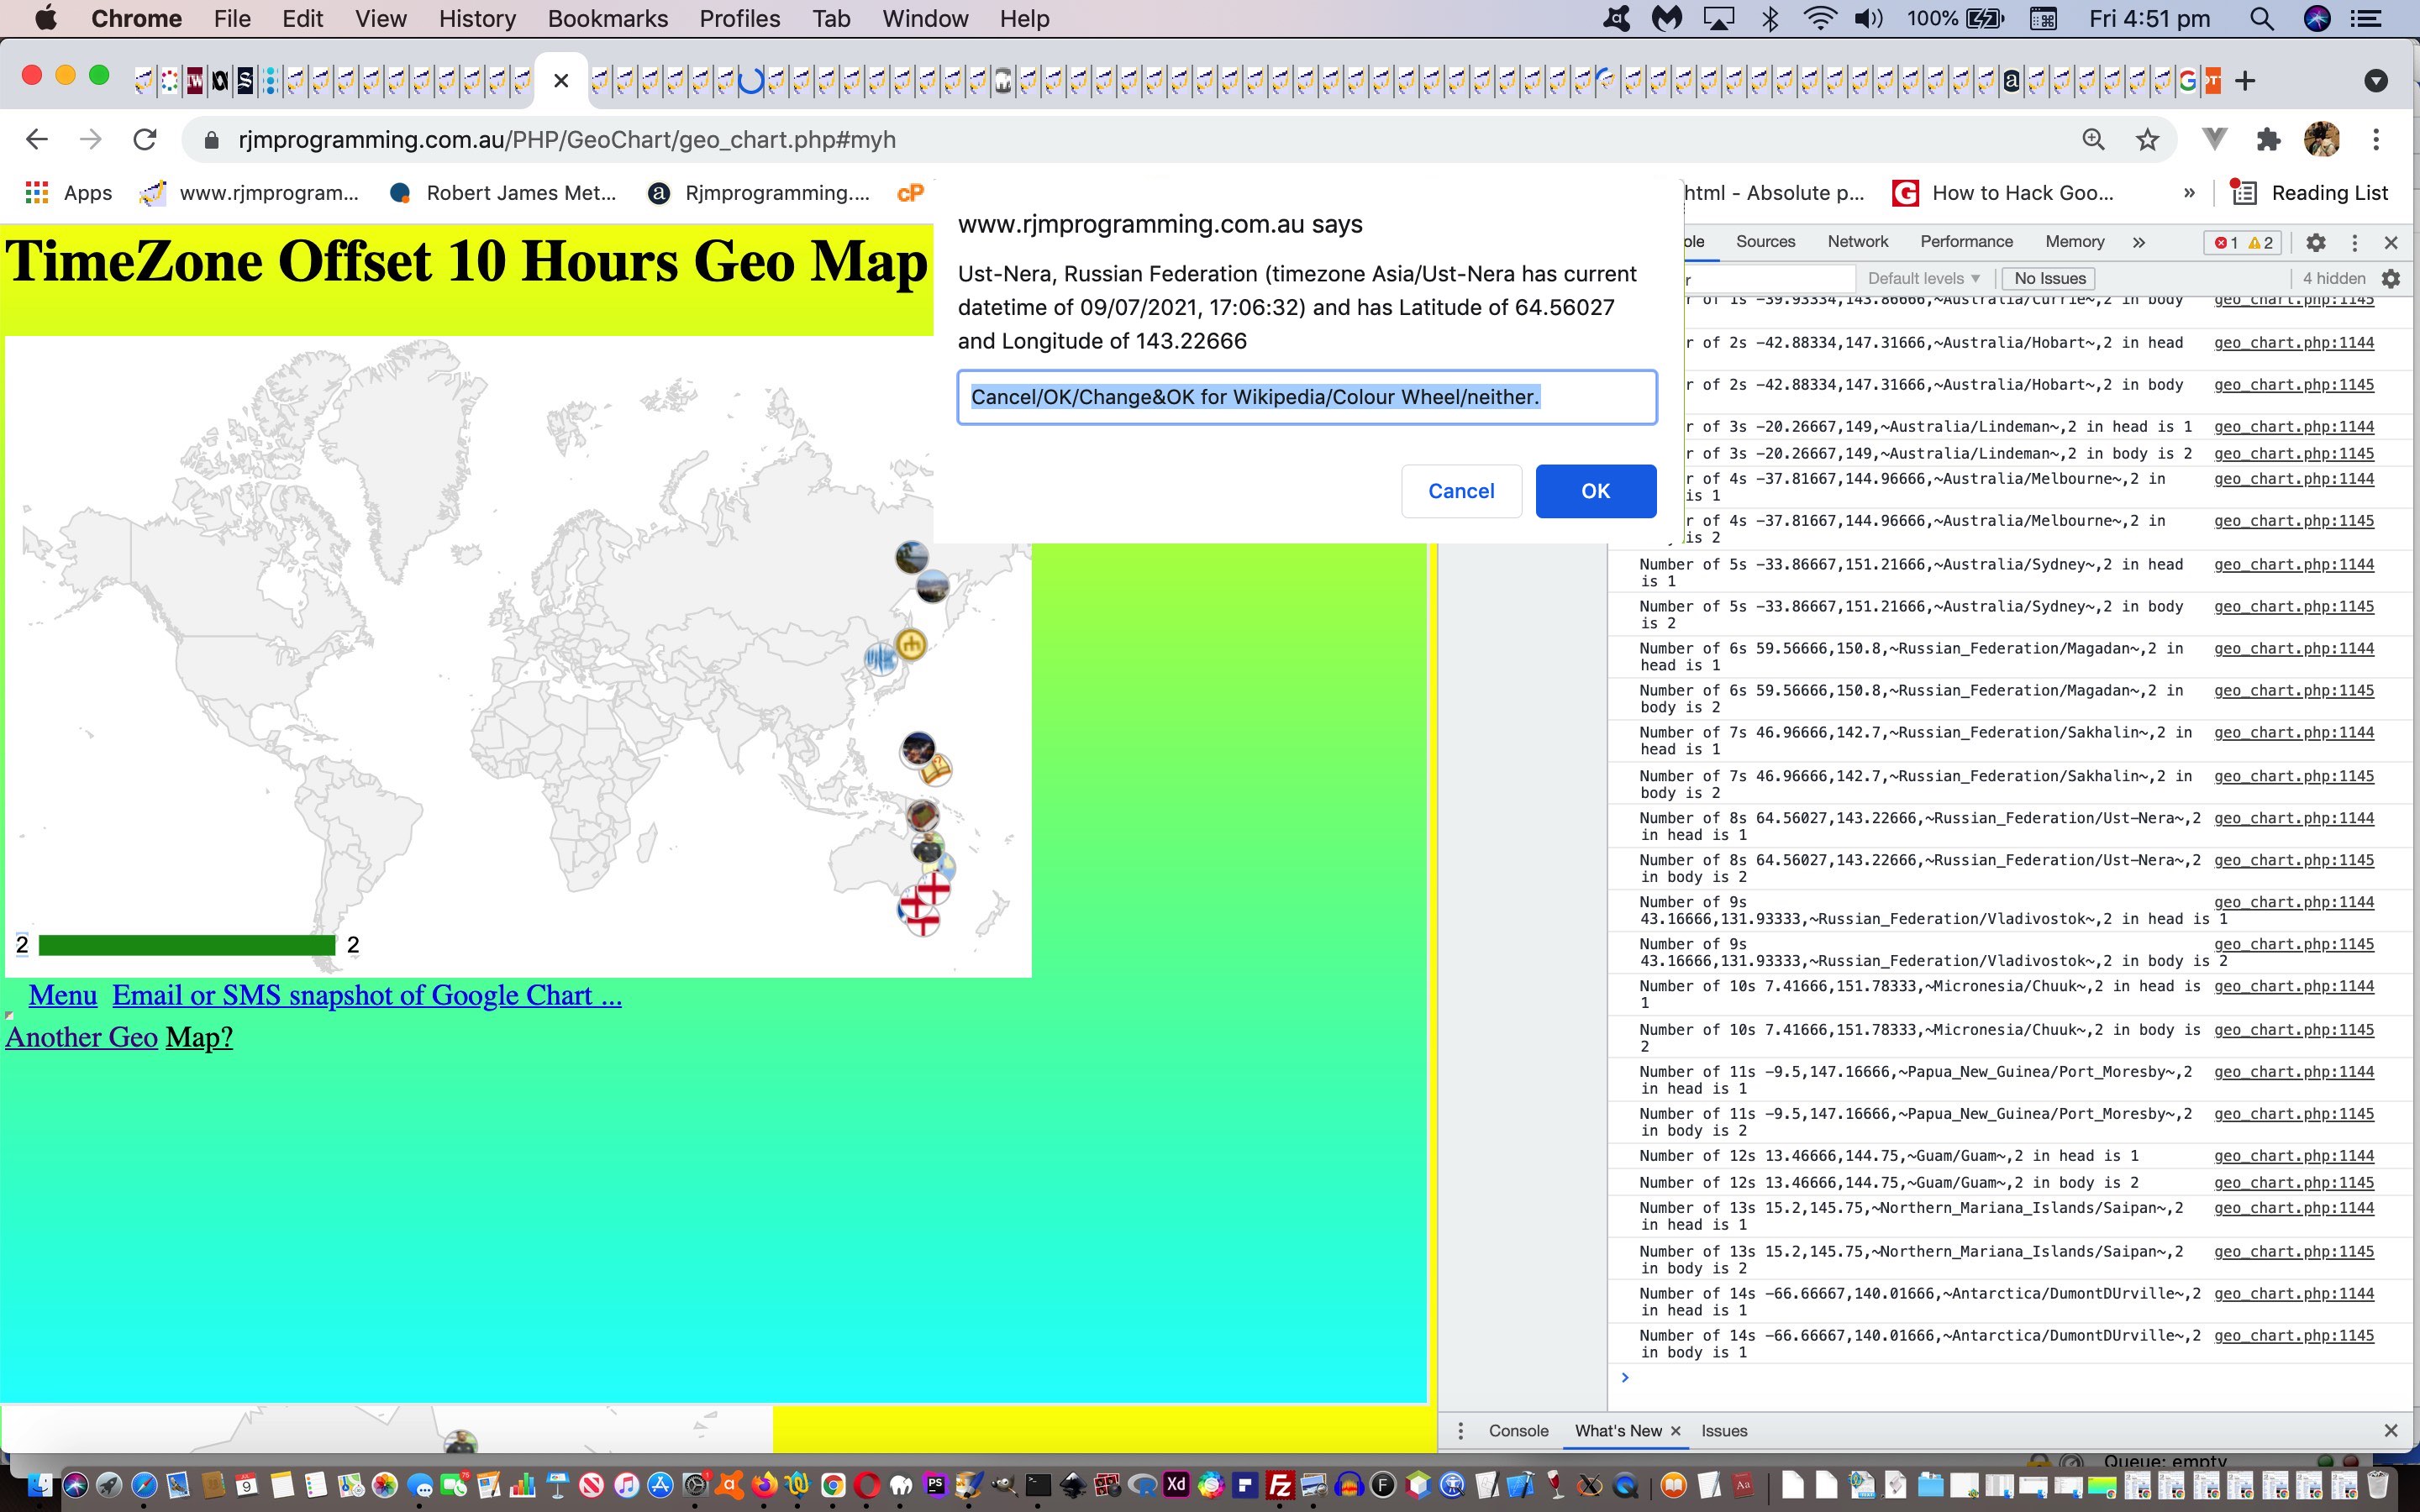 TimeZone Offset Places Google Geo Chart Popup User Interaction Tutorial